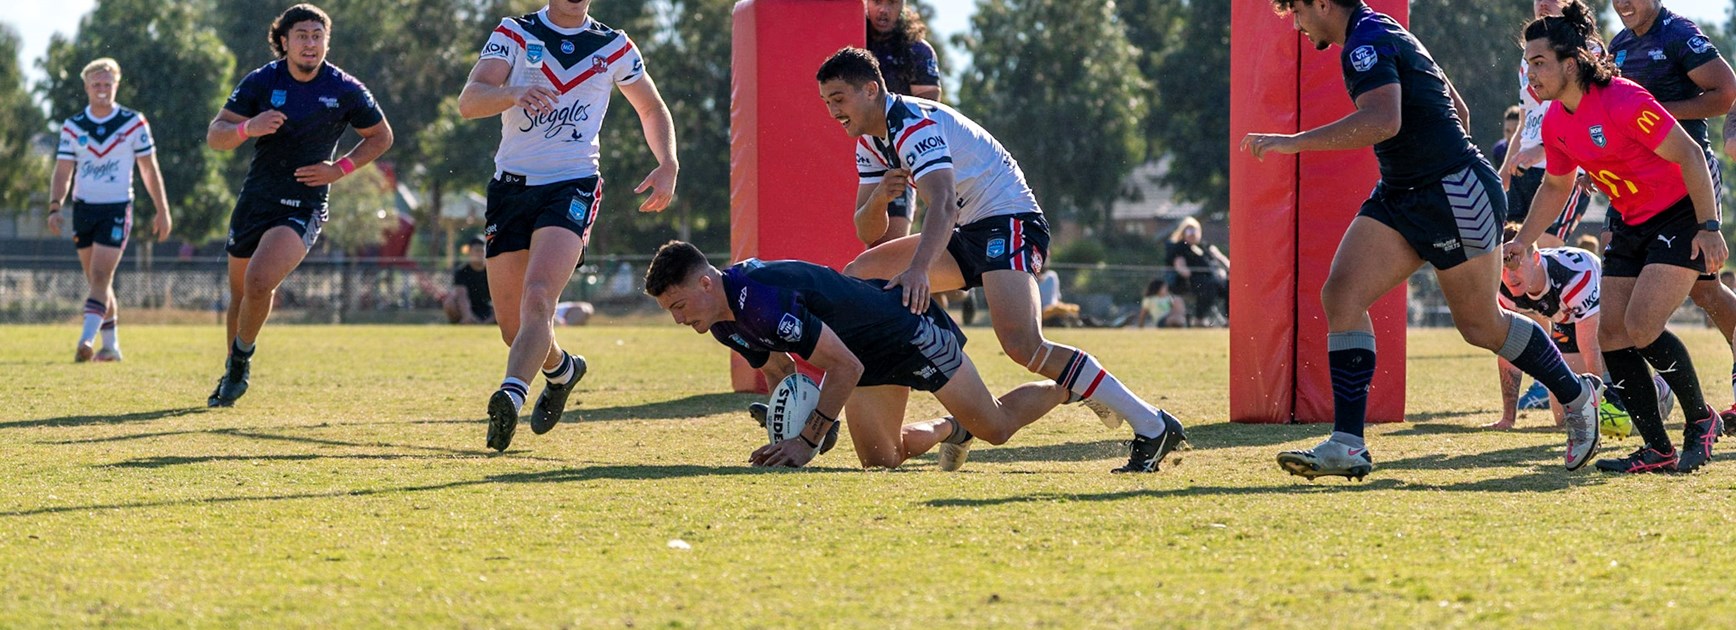 Match Report: Thunderbolts Round 8 v Roosters